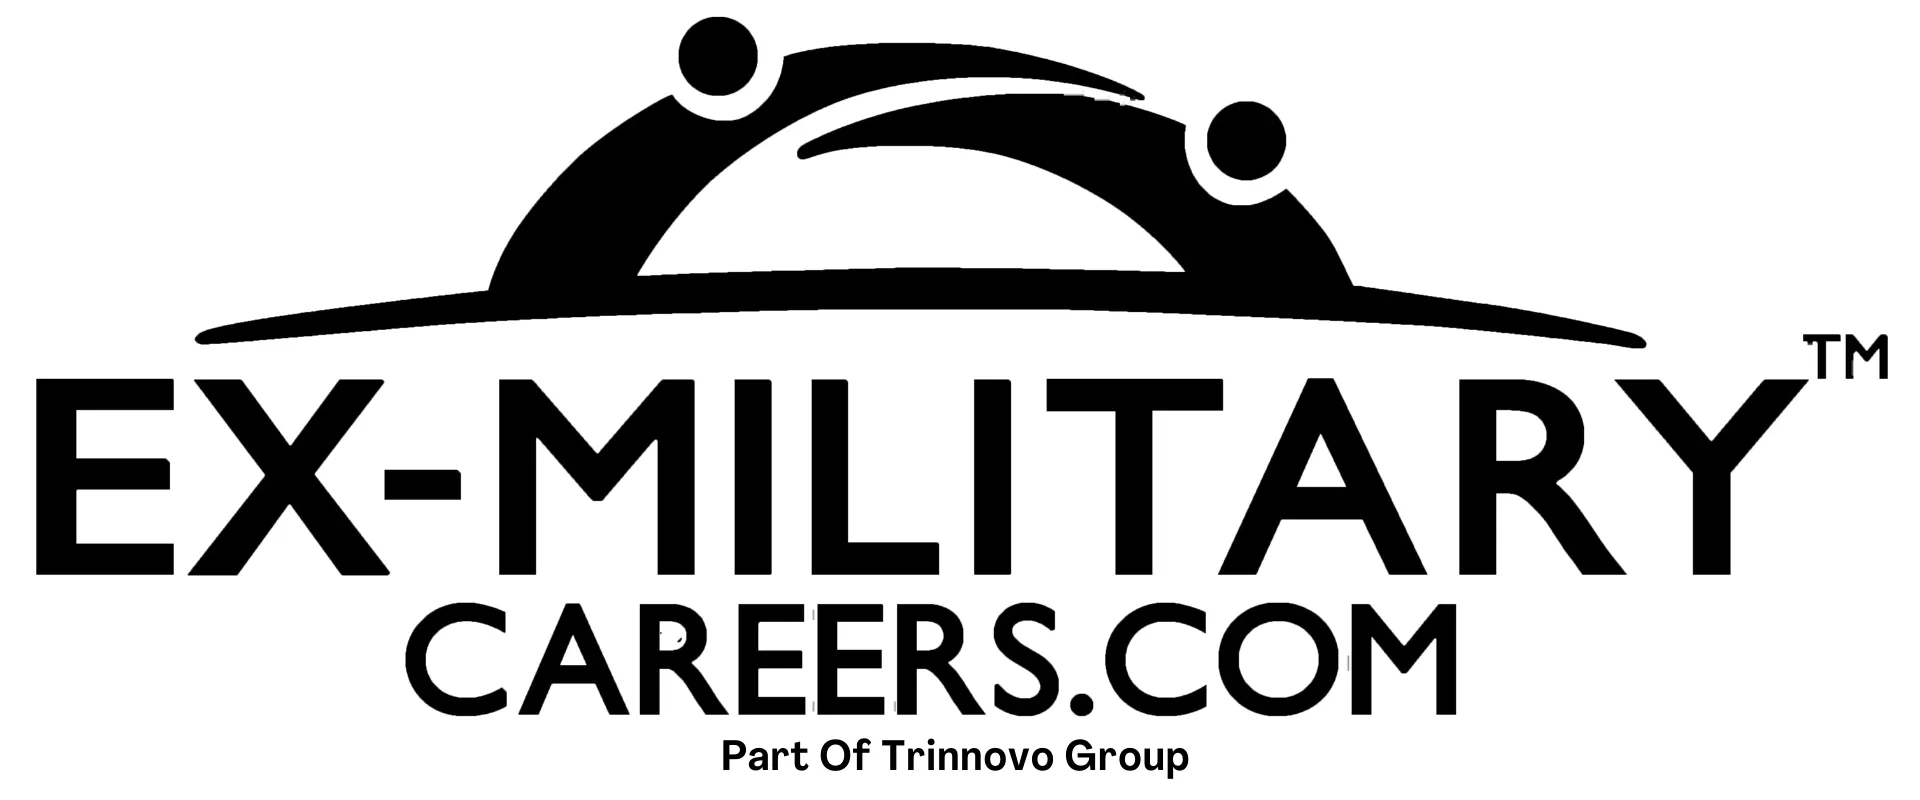 Ex-Military Careers Incorporated into Group